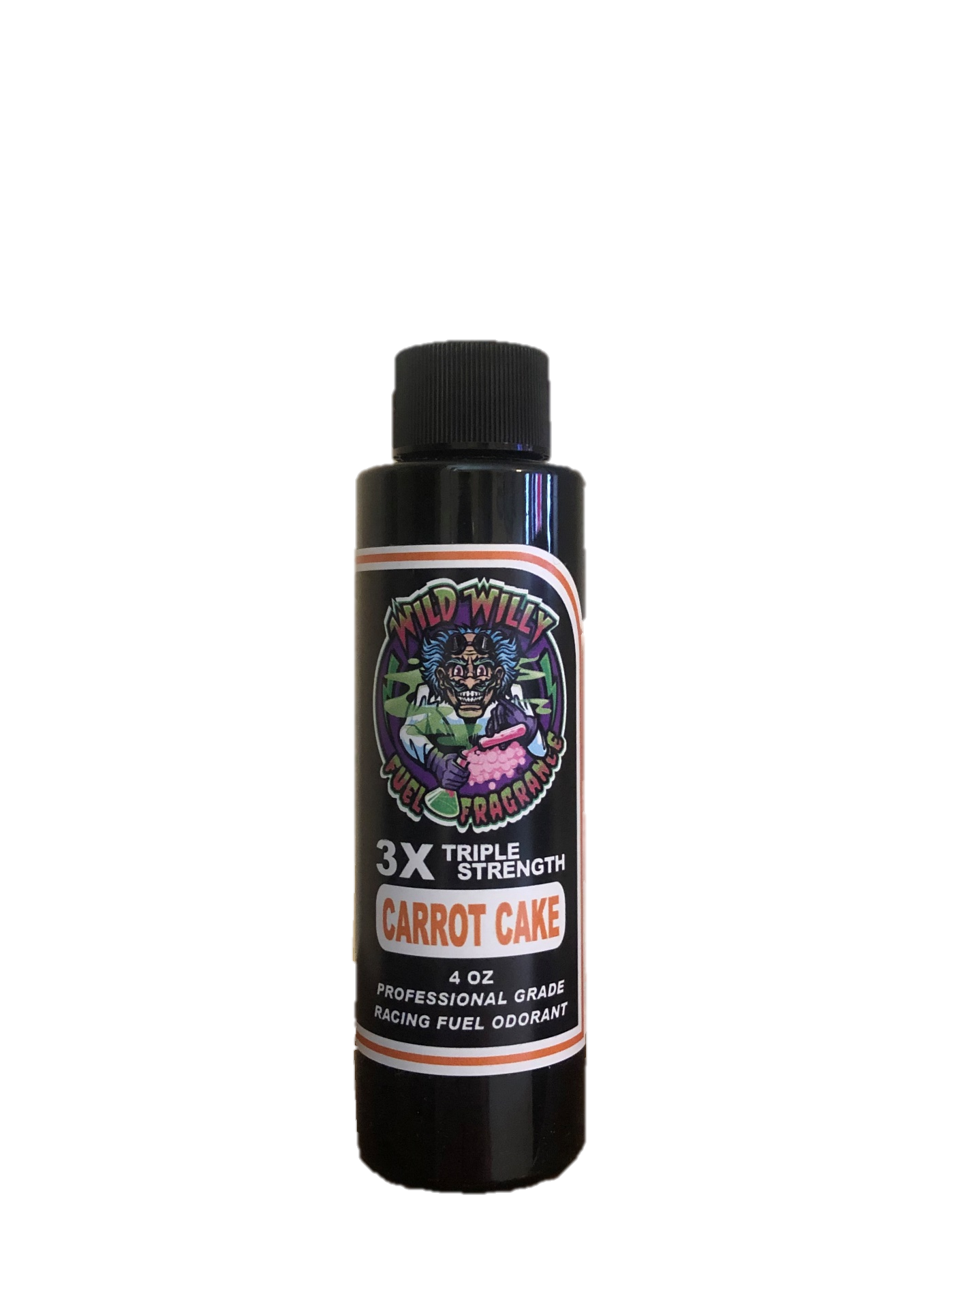 Carrot Cake - Wild Willy Fuel Fragrance - 3X Triple Strength!